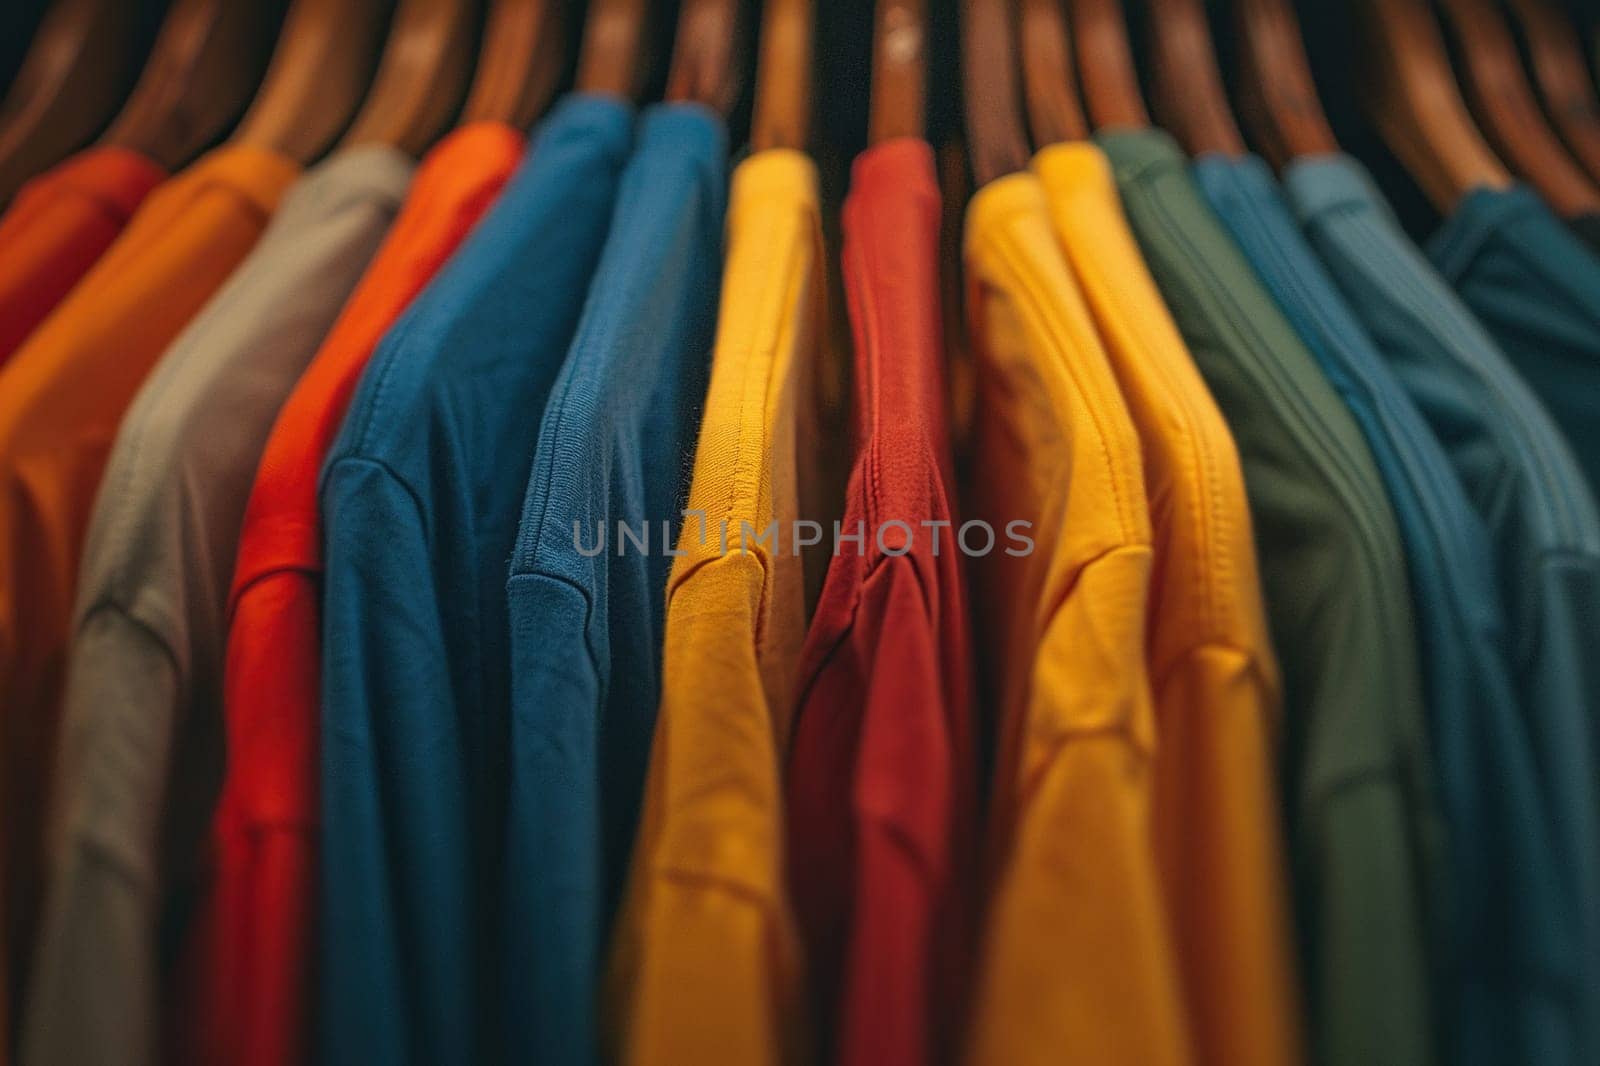 A lot of T-shirts of different colors hang on hangers close-up.